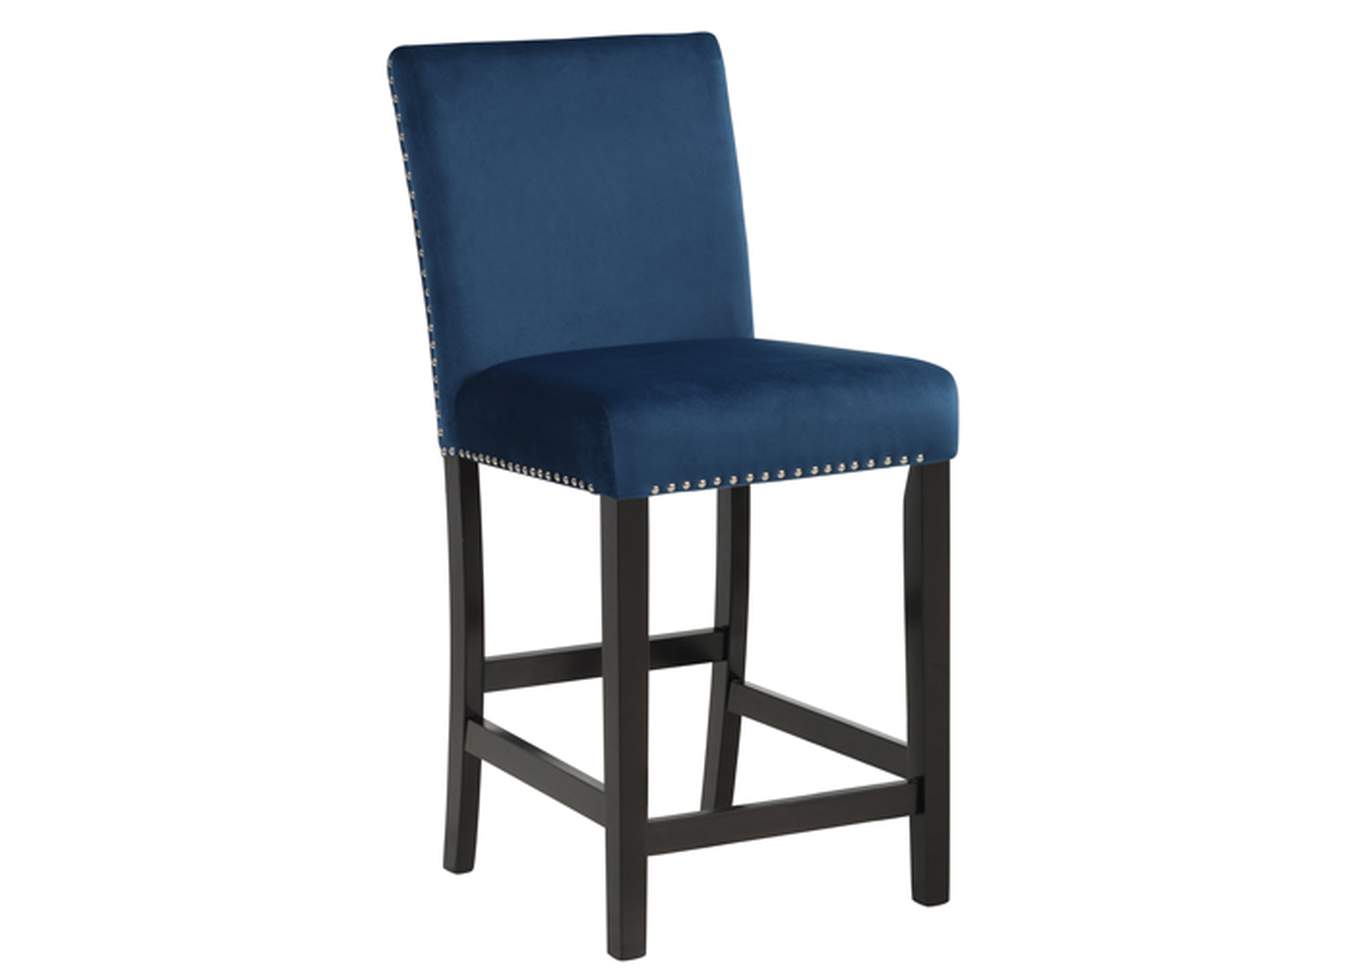 Celeste Counter Height Chair,New Classic